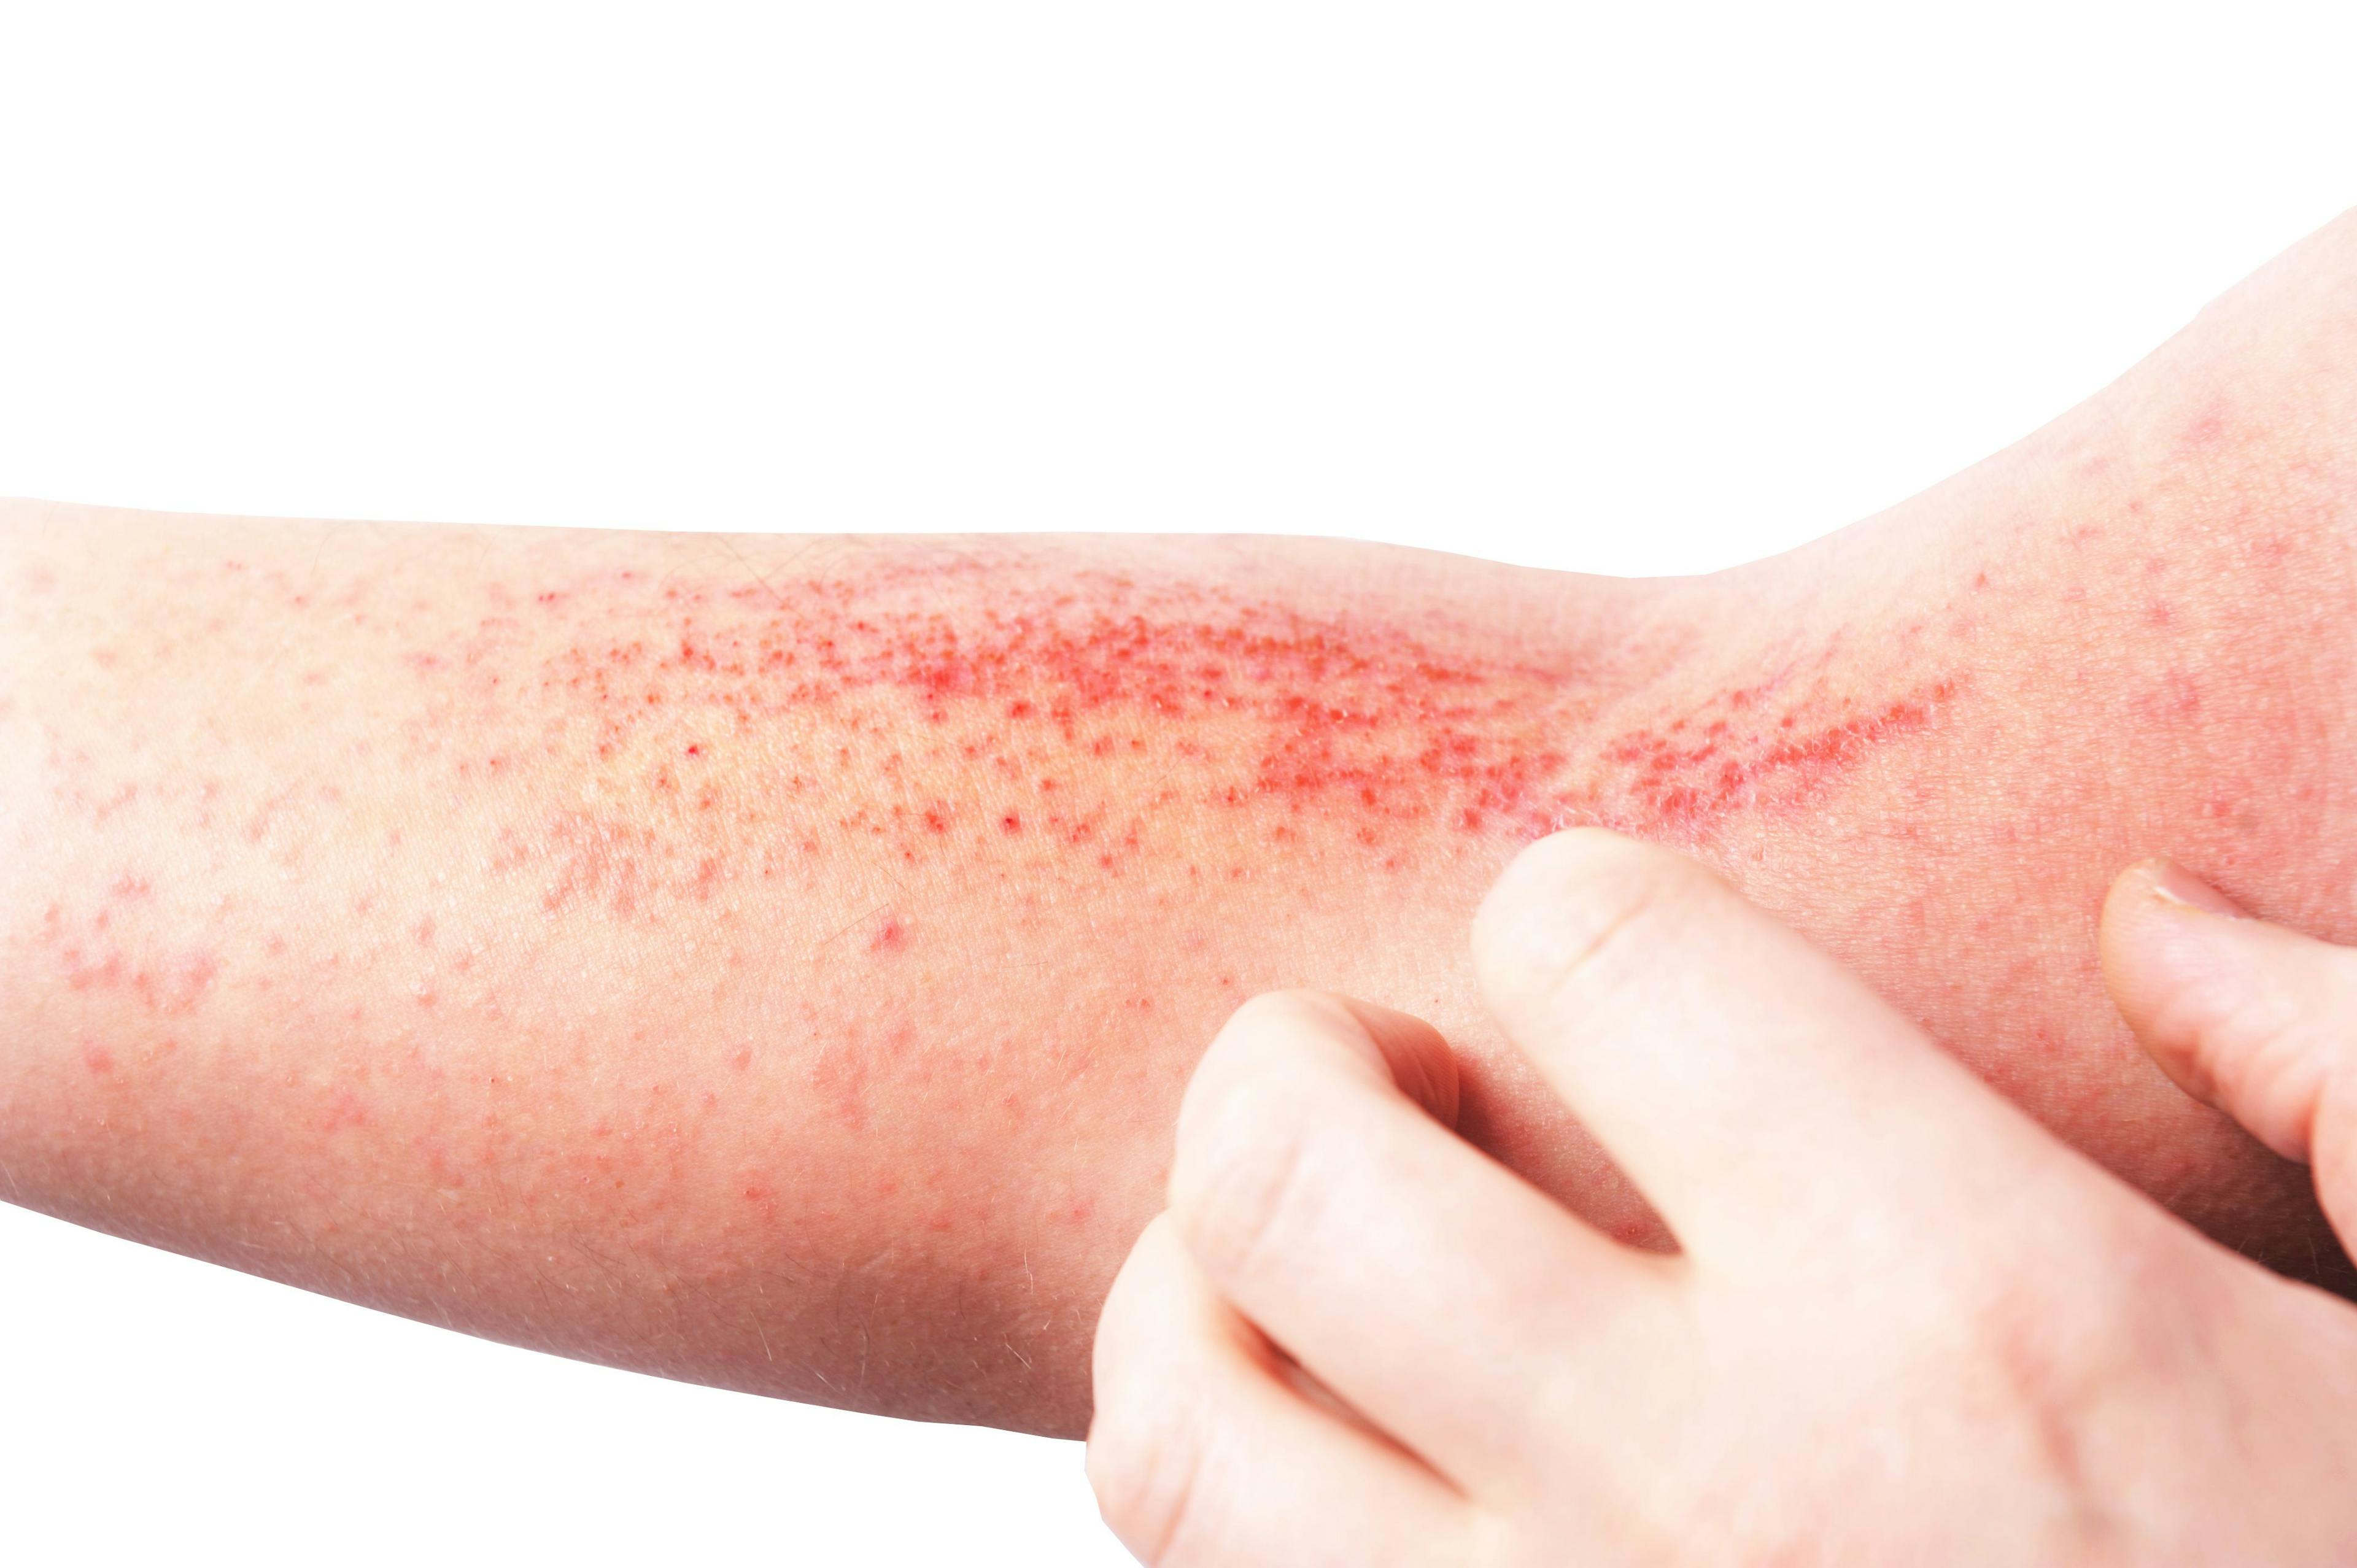 American Academy of Dermatology Updates Guidelines on Atopic Dermatitis Treatments